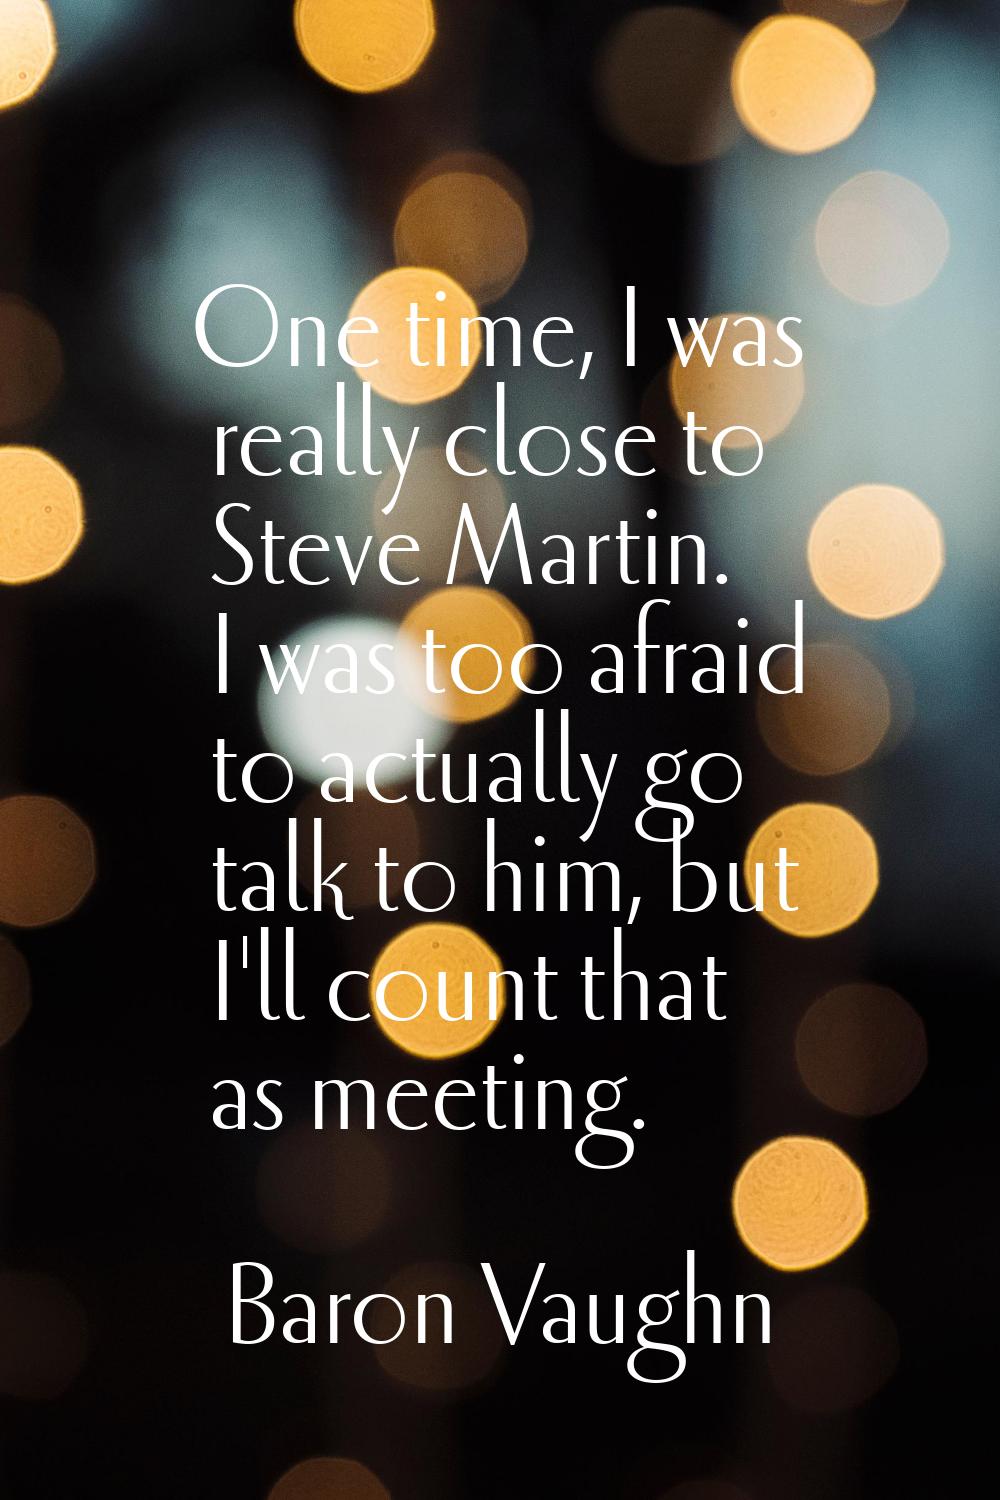 One time, I was really close to Steve Martin. I was too afraid to actually go talk to him, but I'll